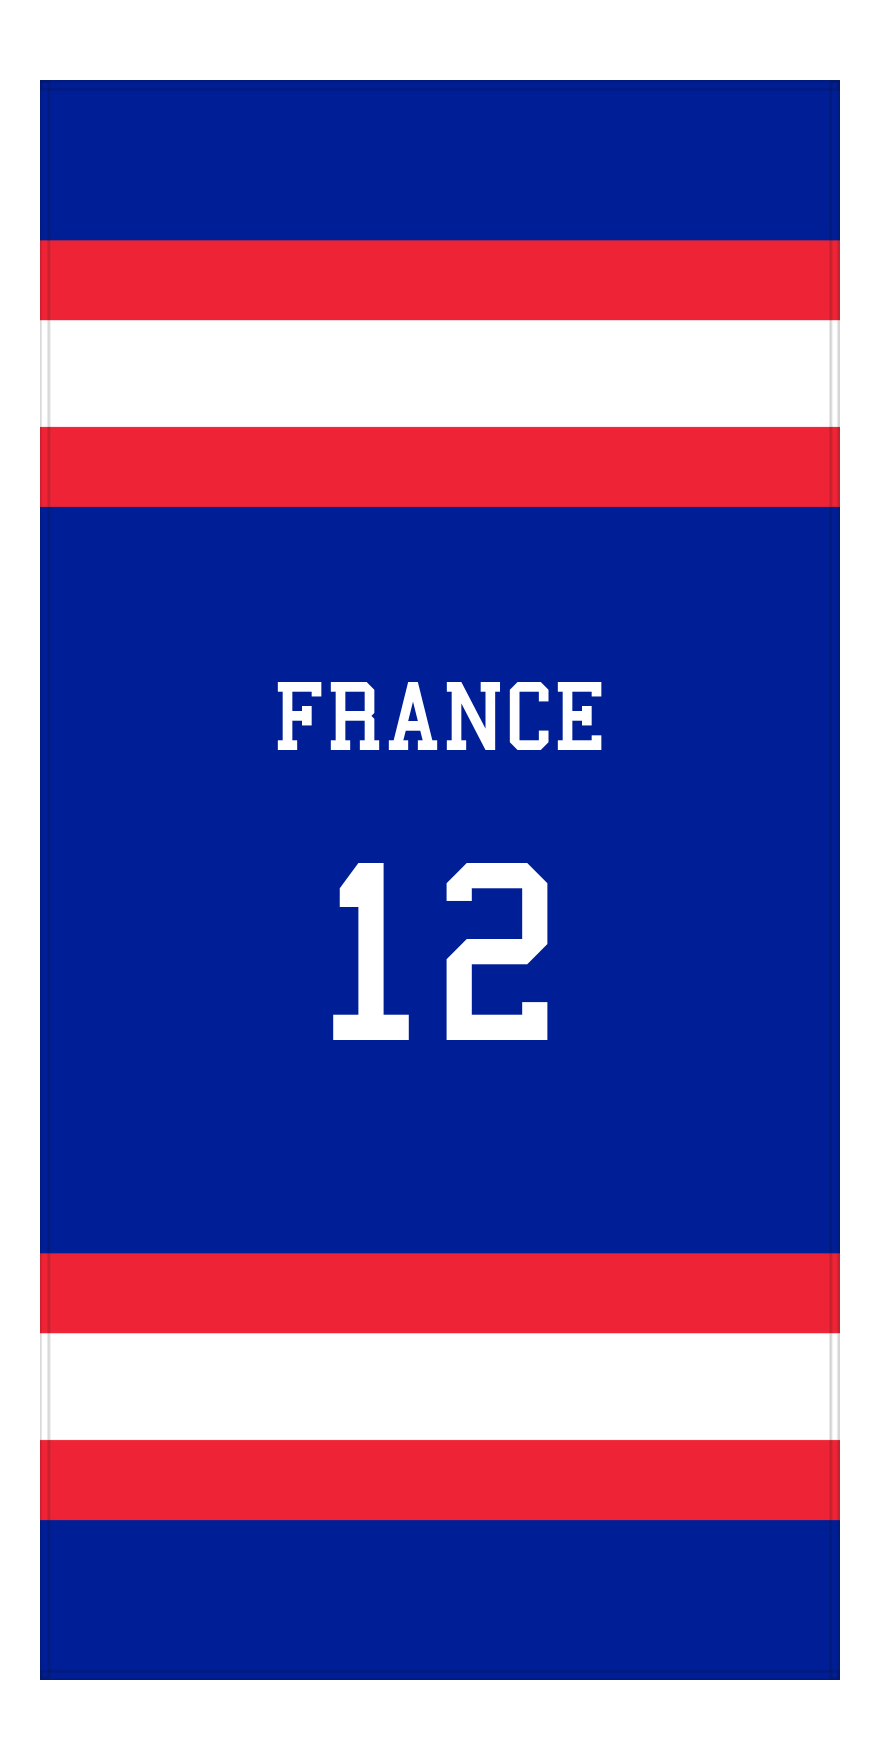 Personalized Jersey Number 1-on-1 Stripes Sports Beach Towel - France - Vertical Design - Front View